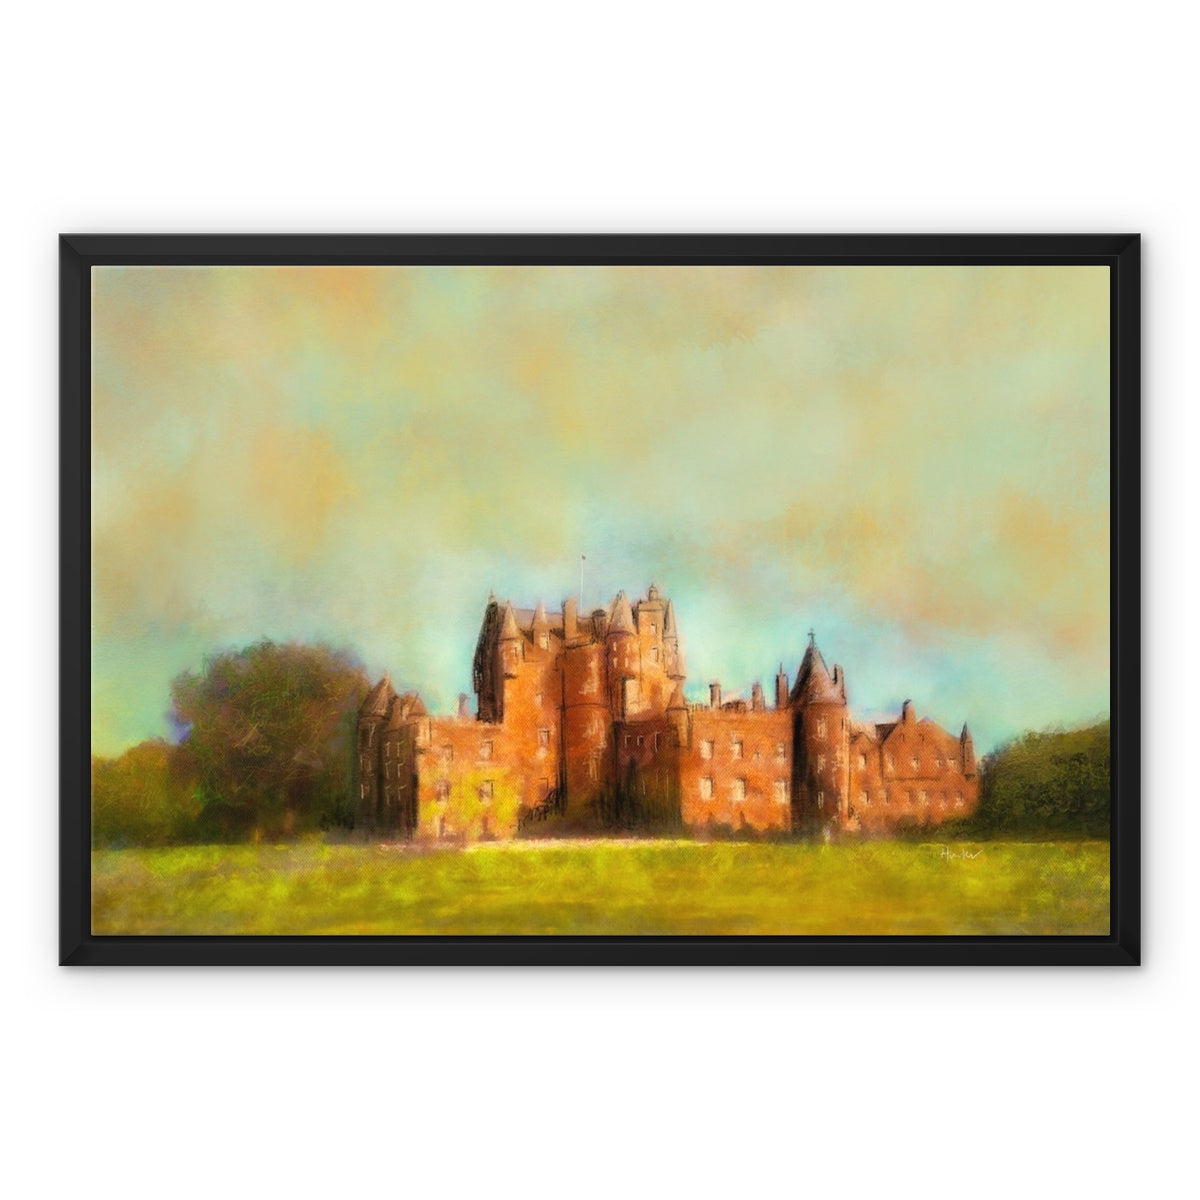 Glamis Castle Painting | Framed Canvas From Scotland-Floating Framed Canvas Prints-Historic & Iconic Scotland Art Gallery-24"x18"-Black Frame-Paintings, Prints, Homeware, Art Gifts From Scotland By Scottish Artist Kevin Hunter